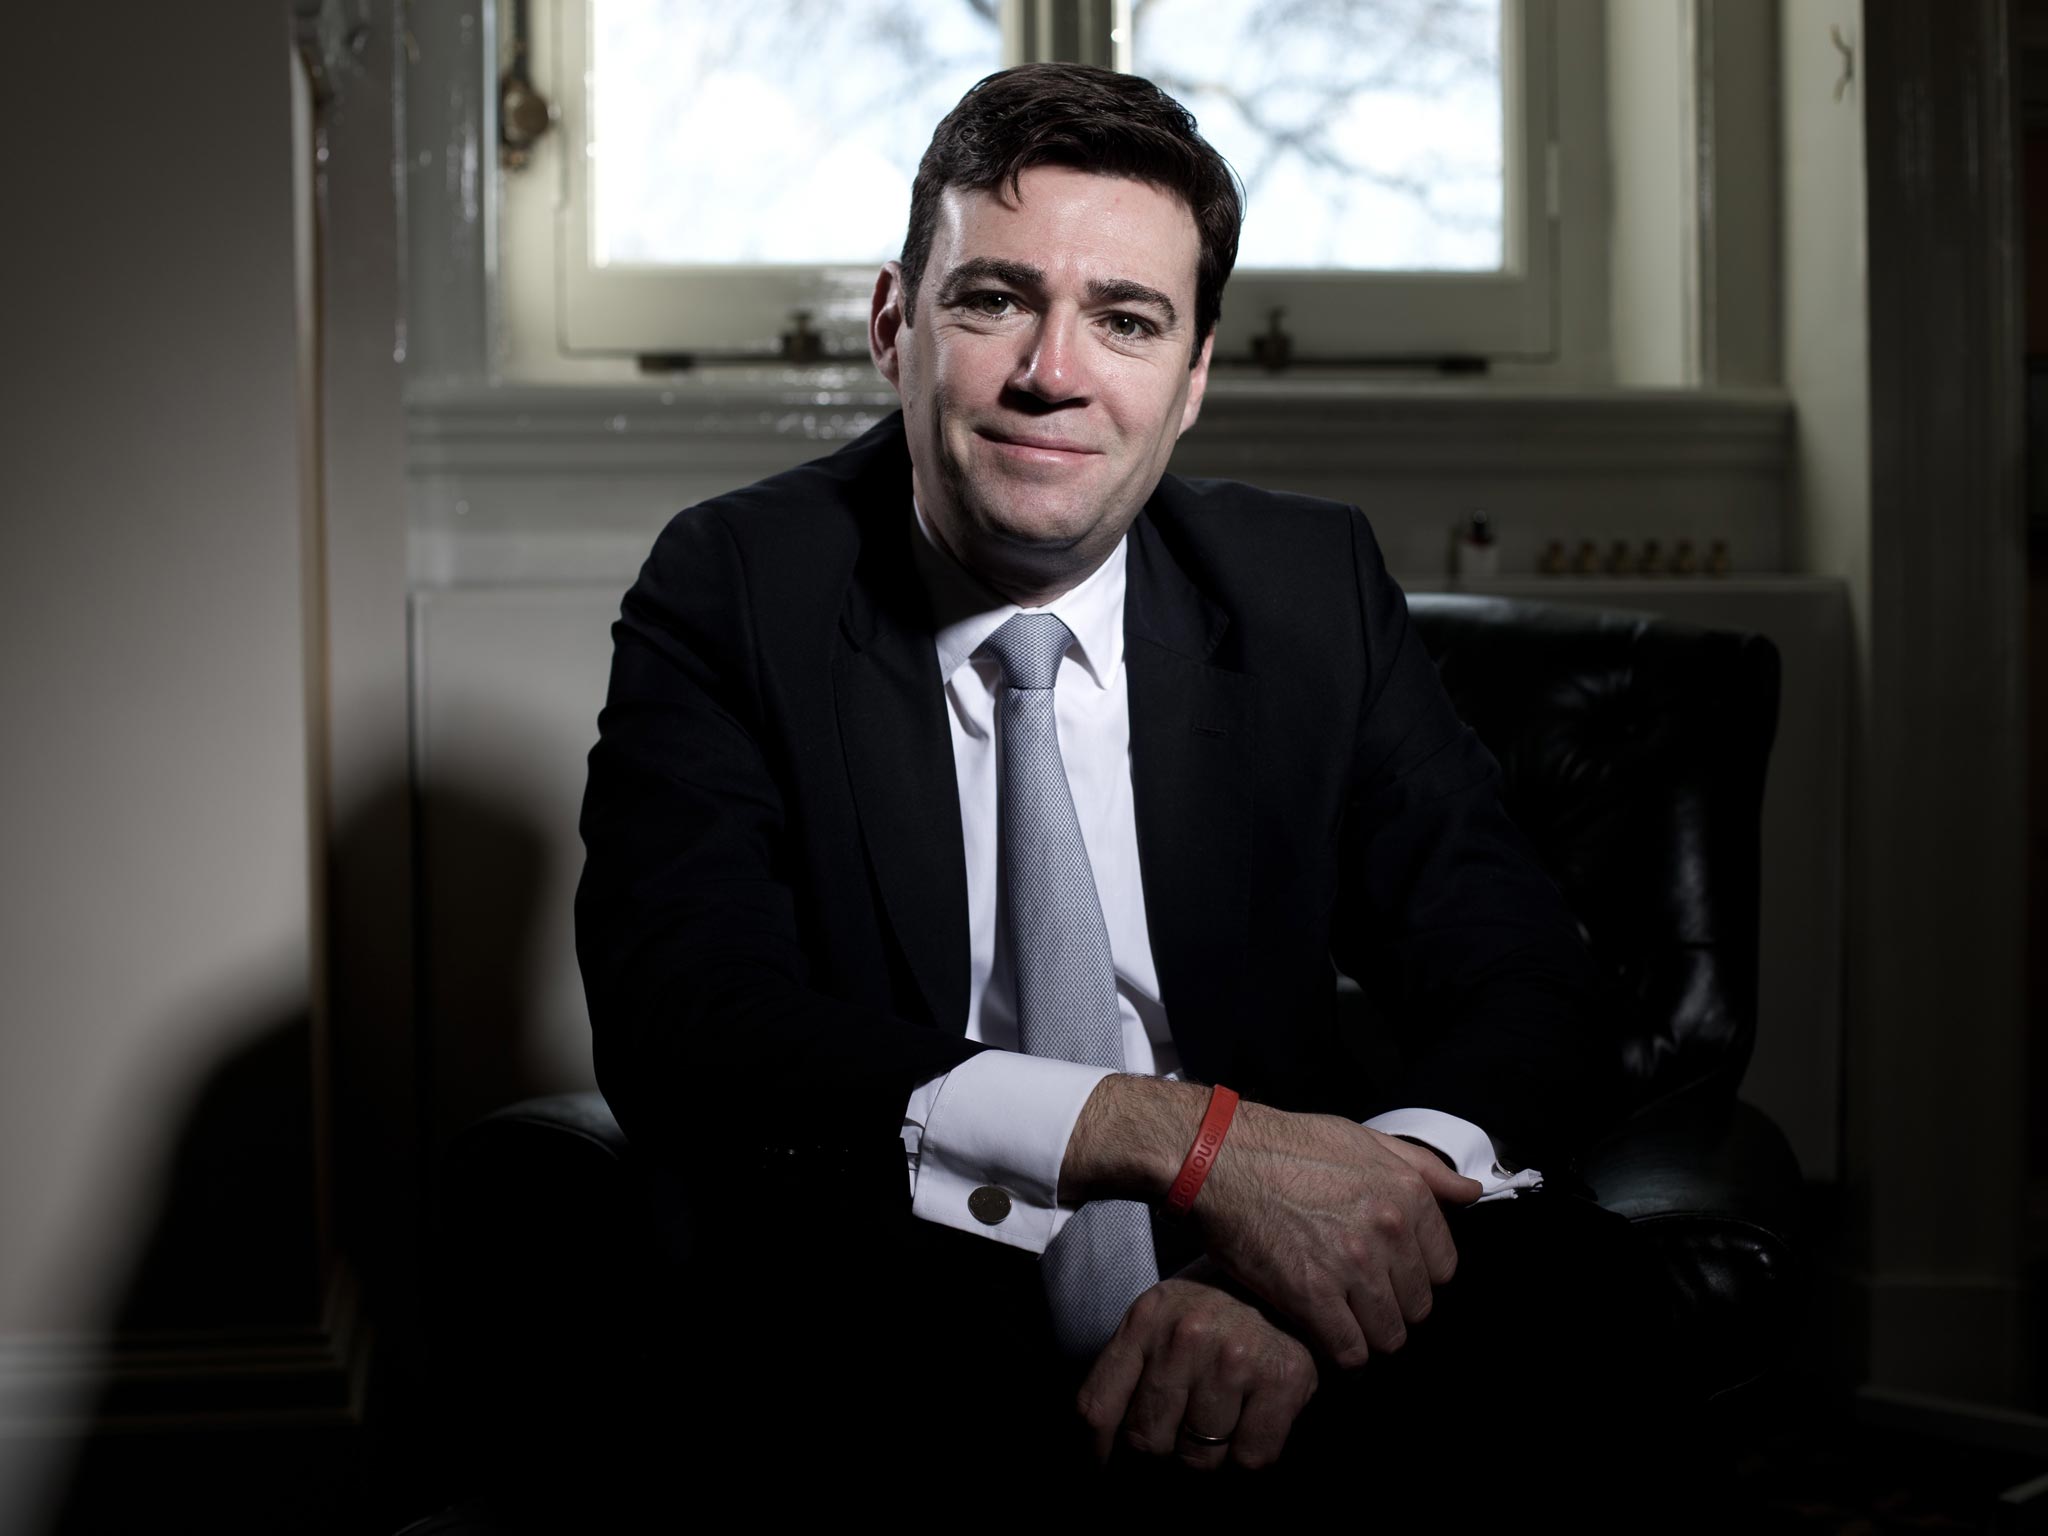 Shadow Health Secretary Andy Burnham NHS proposals have been vetoed by Labour leader Ed Miliband